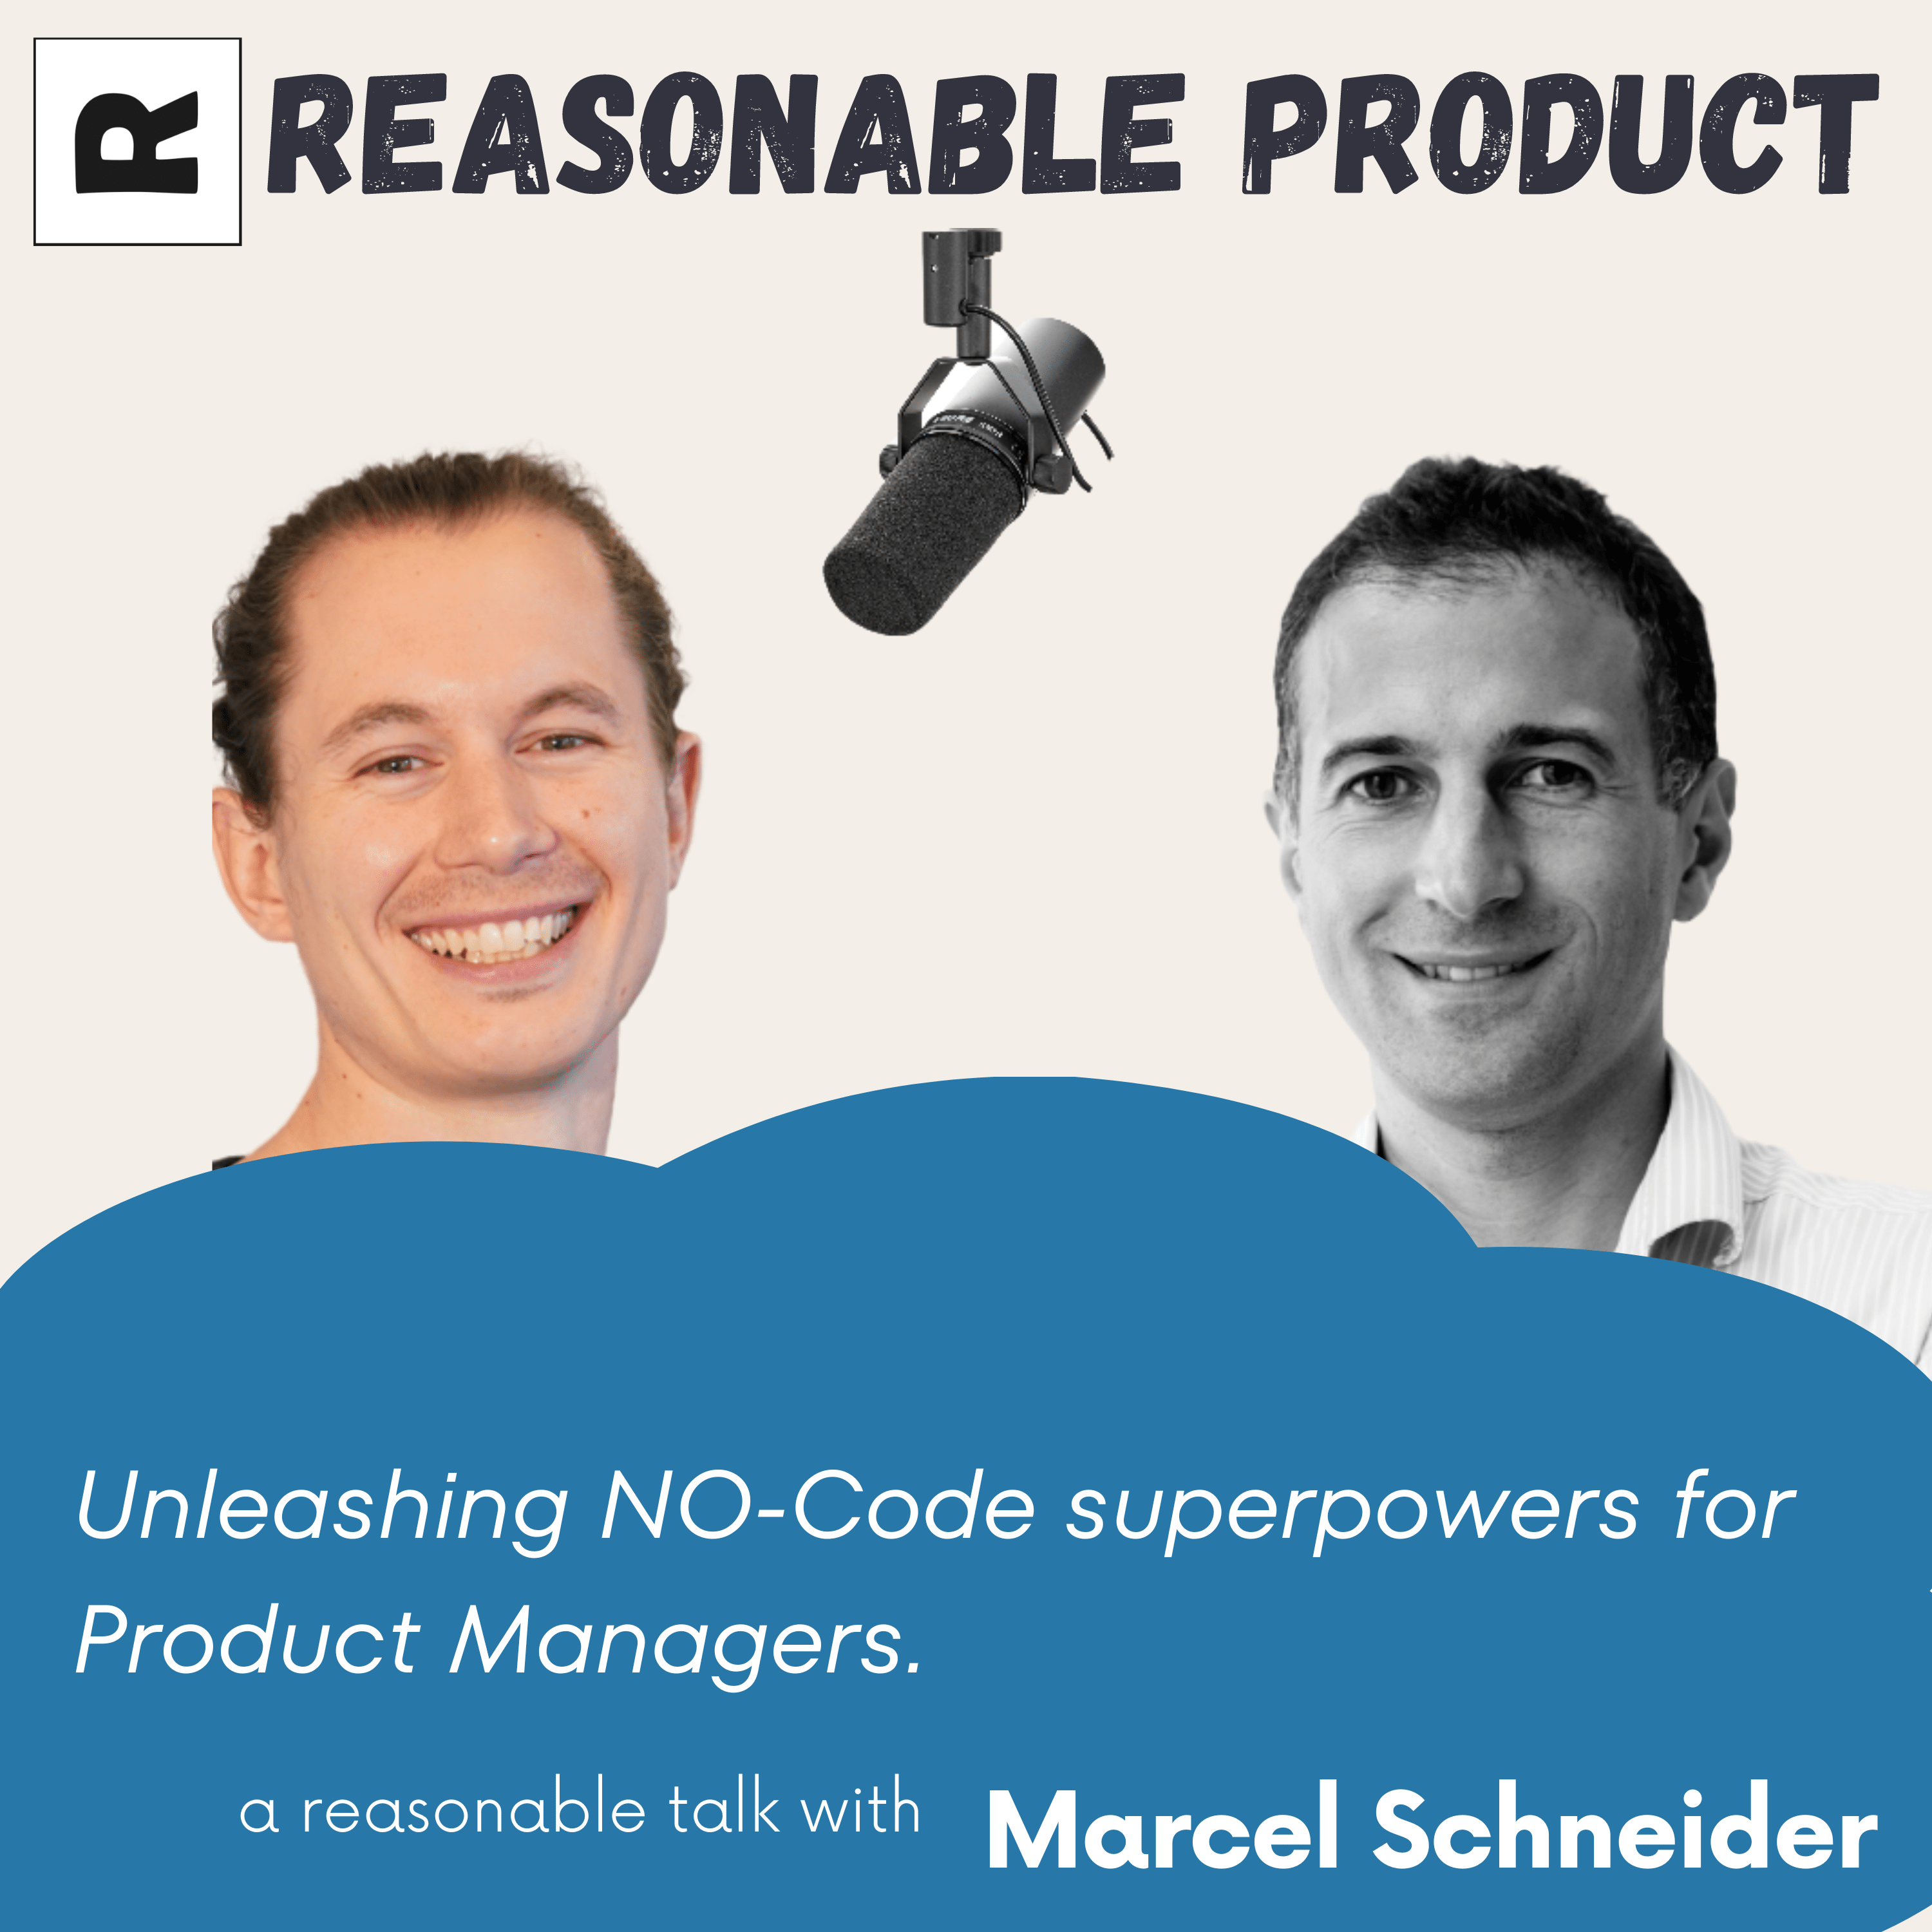 Unleashing NO-Code superpowers for Product Managers – With Marcel Schneider (HuggyStudio)